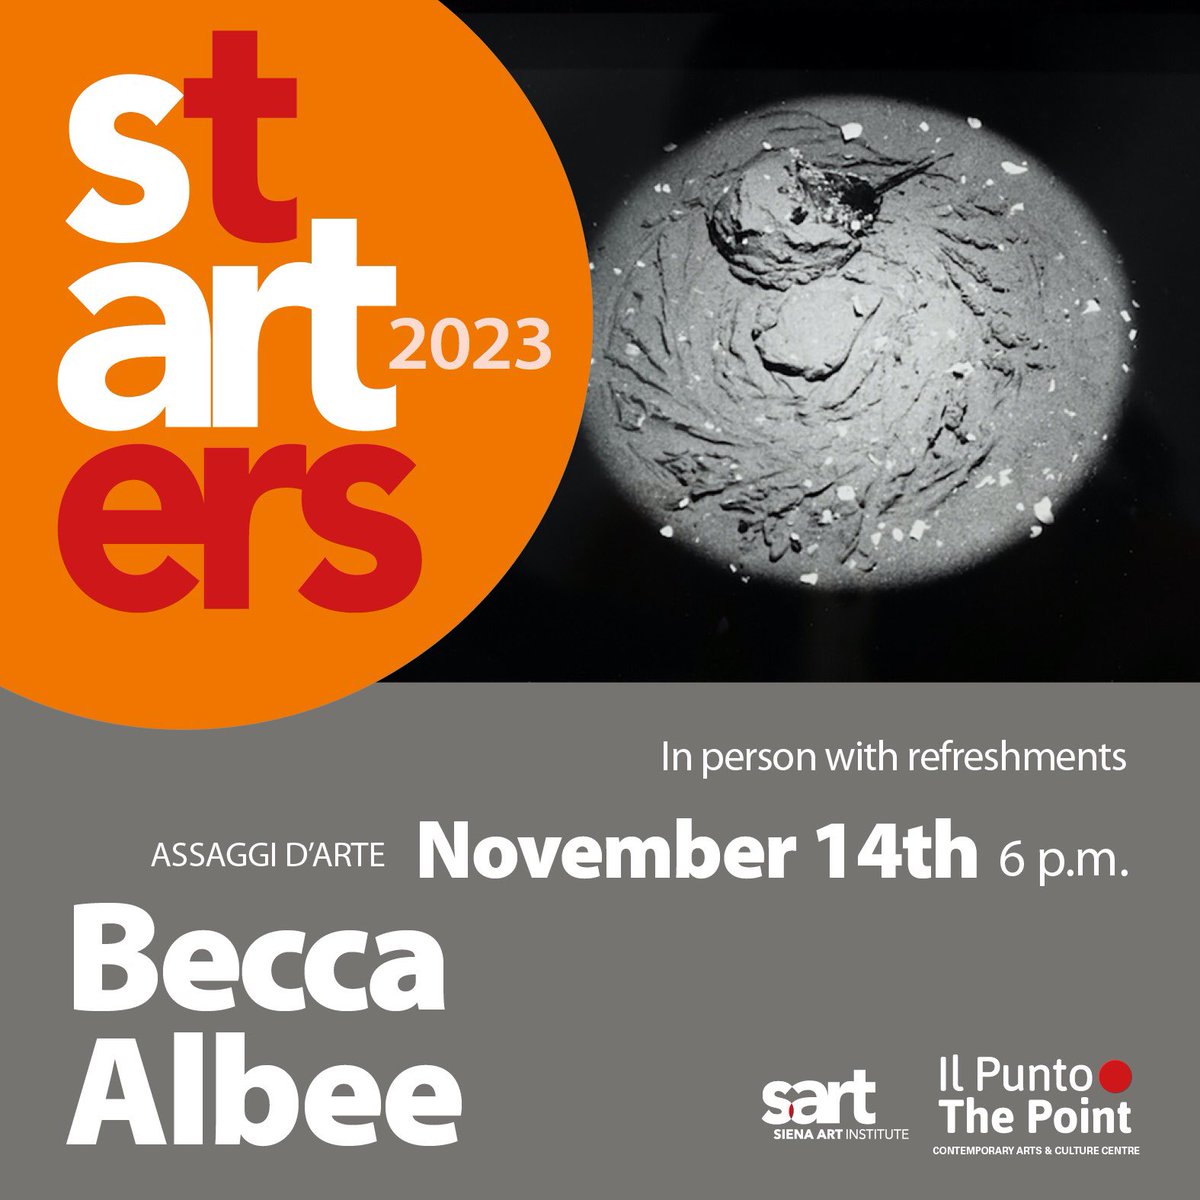 Ci vediamo stasera! See you tonight in person at 6pm at the Siena Art Institute, for an artist’s talk with our current resident, American artist Becca Albee! Free and open to the public